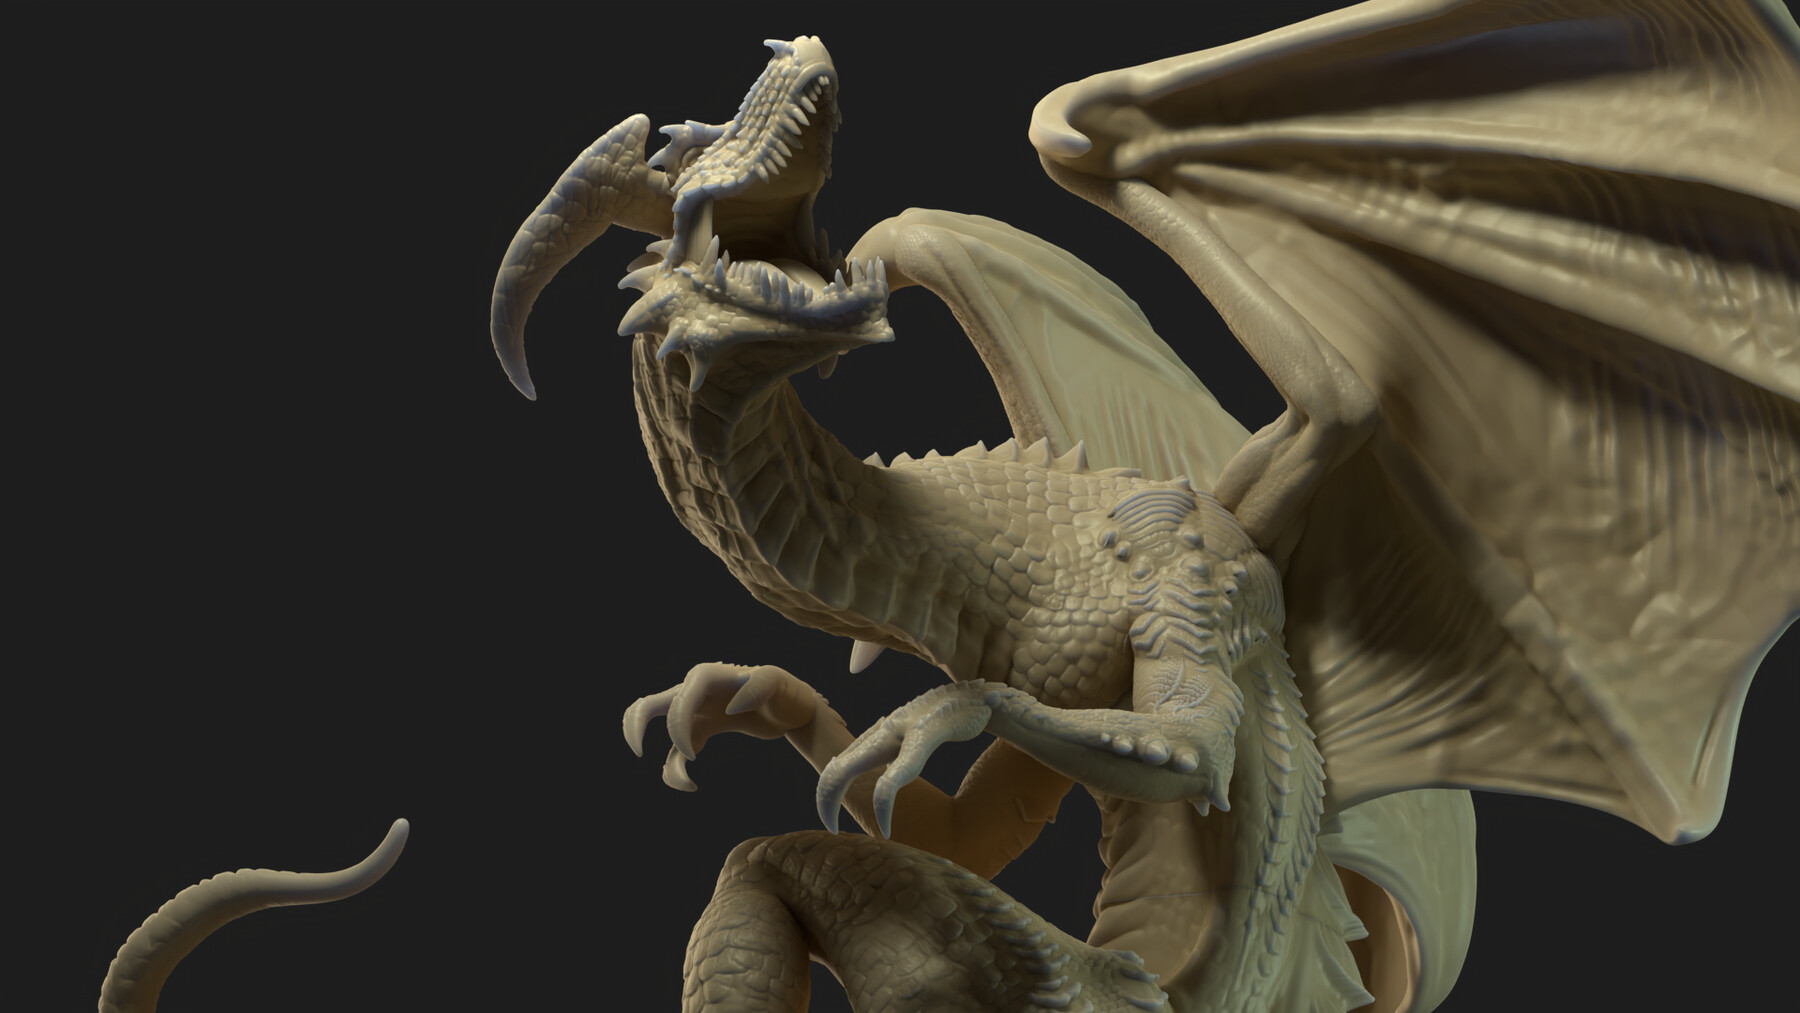 3D Printable Glaurung the Deceiver by 3DprintingRealms